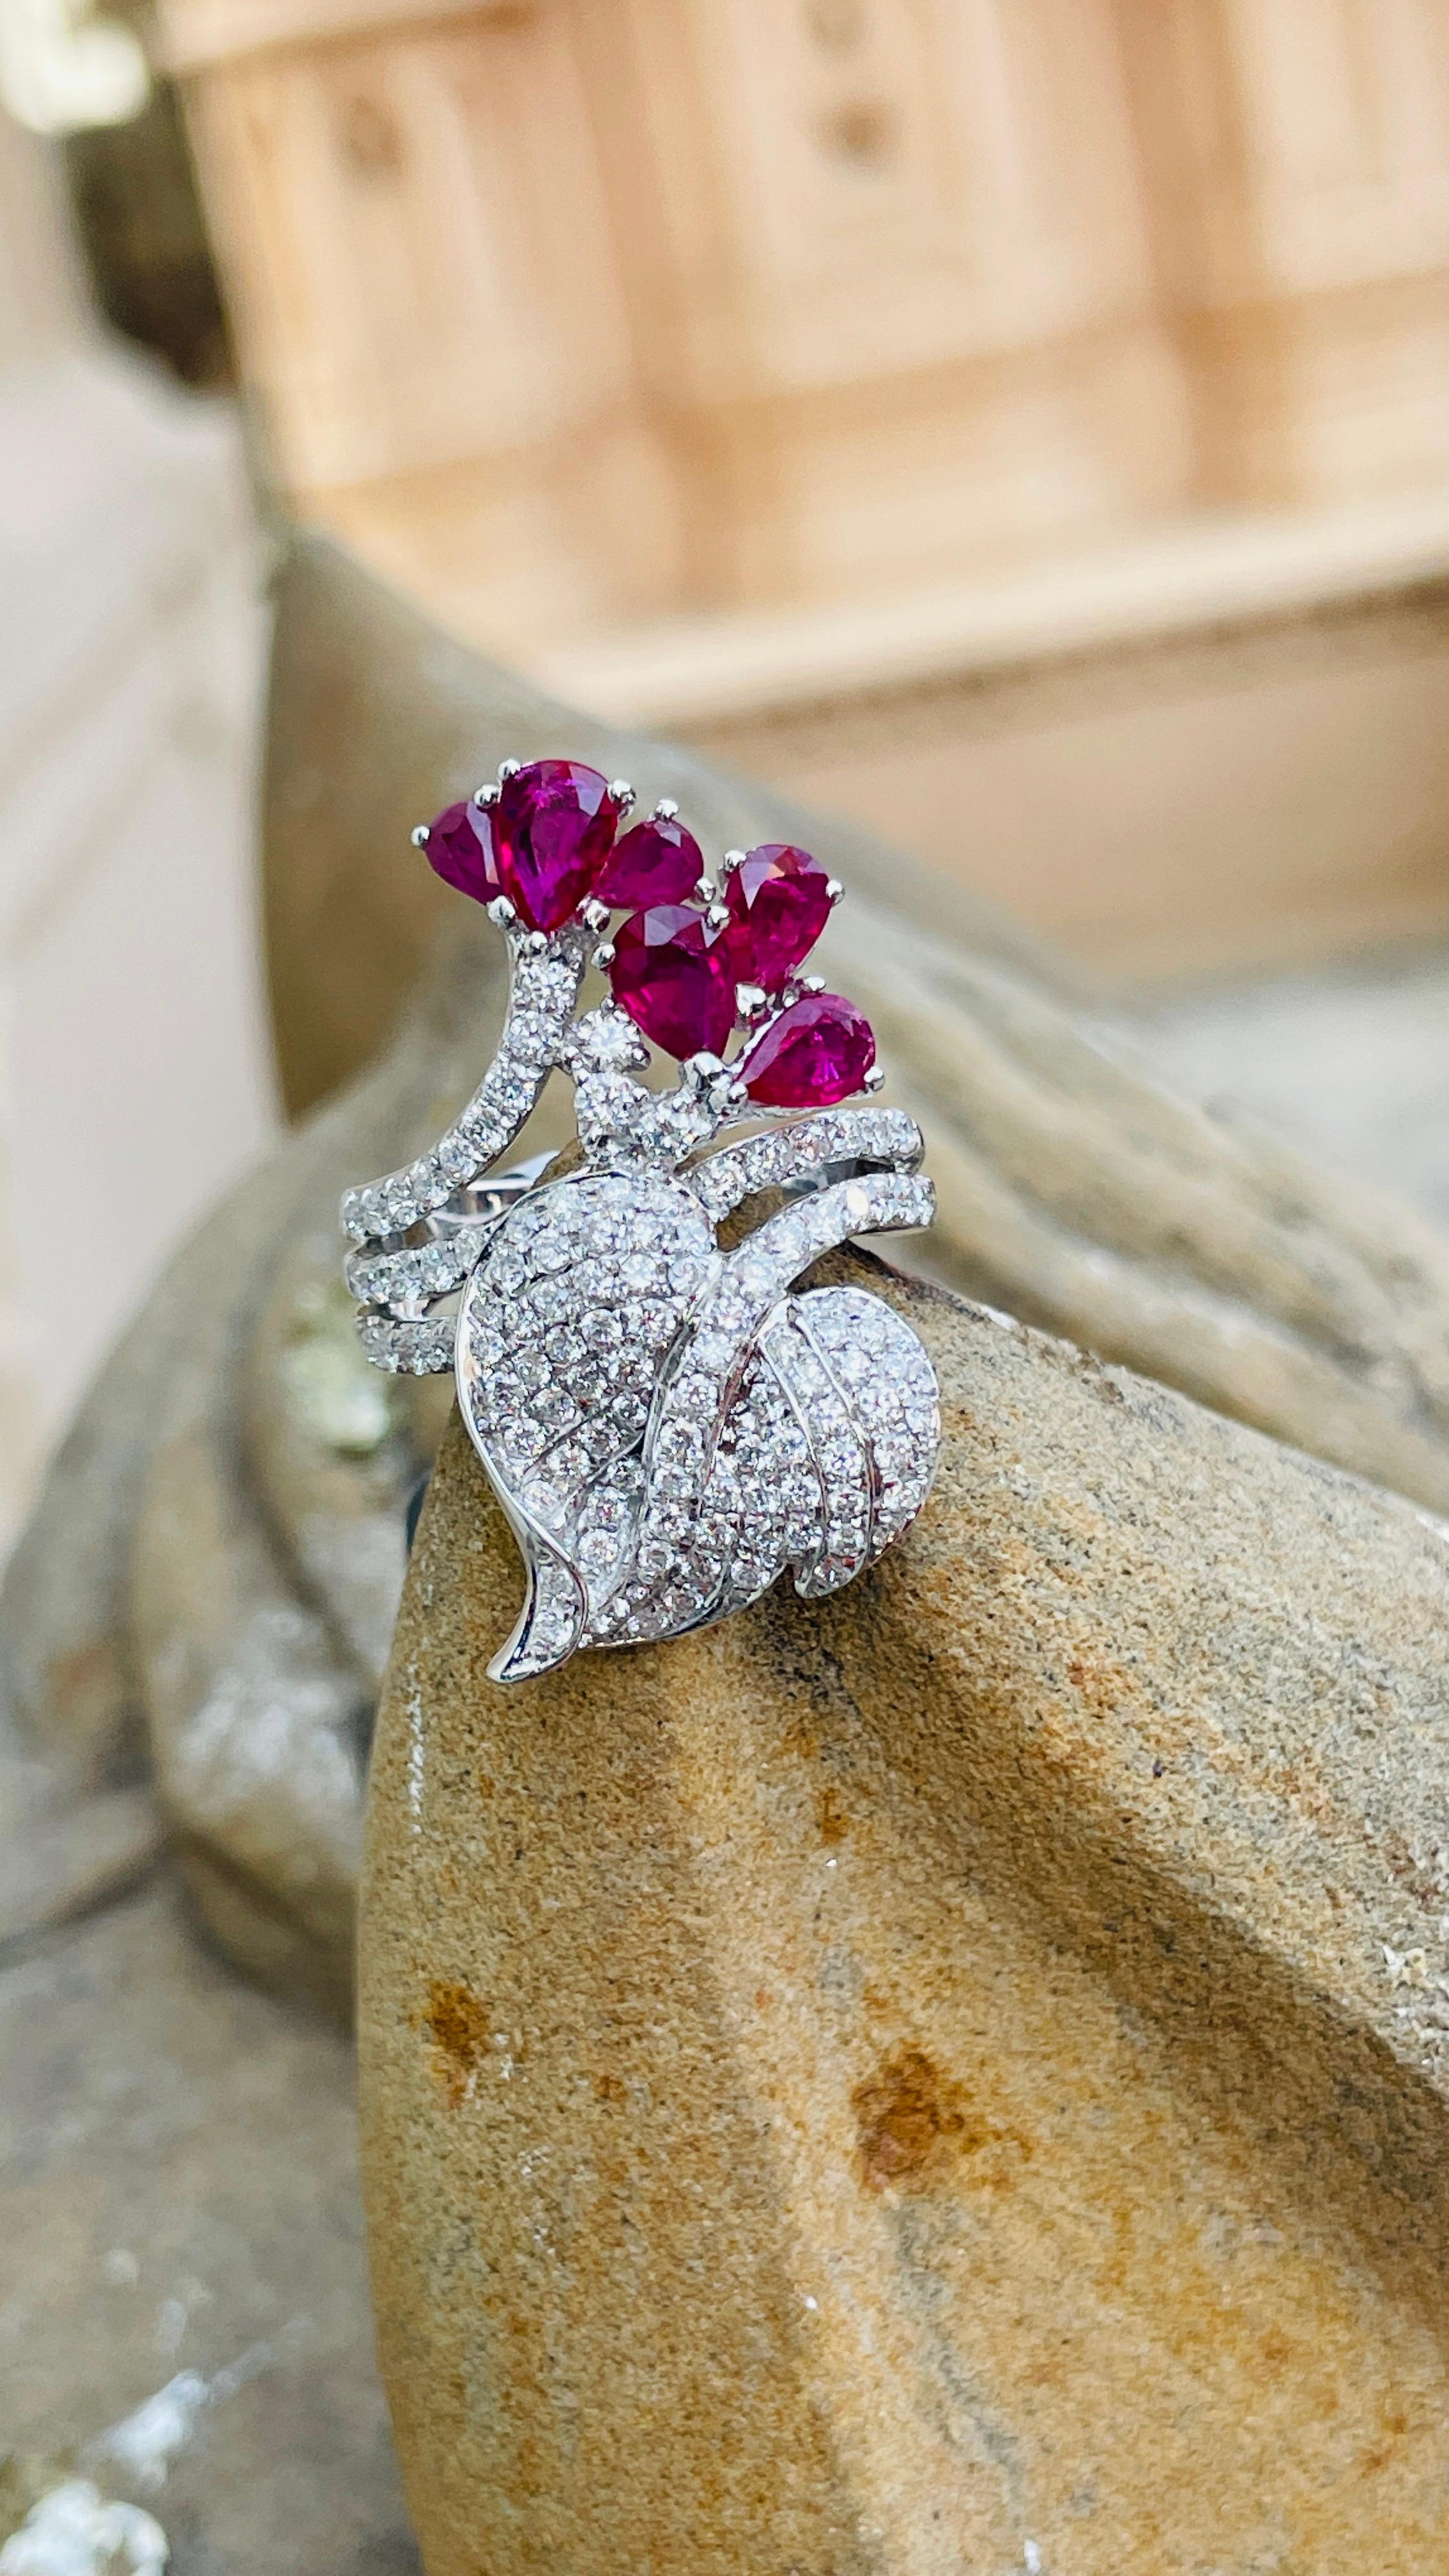 For Sale:  14K White Gold Pear Cut Ruby and Diamond Bridal Ring 6